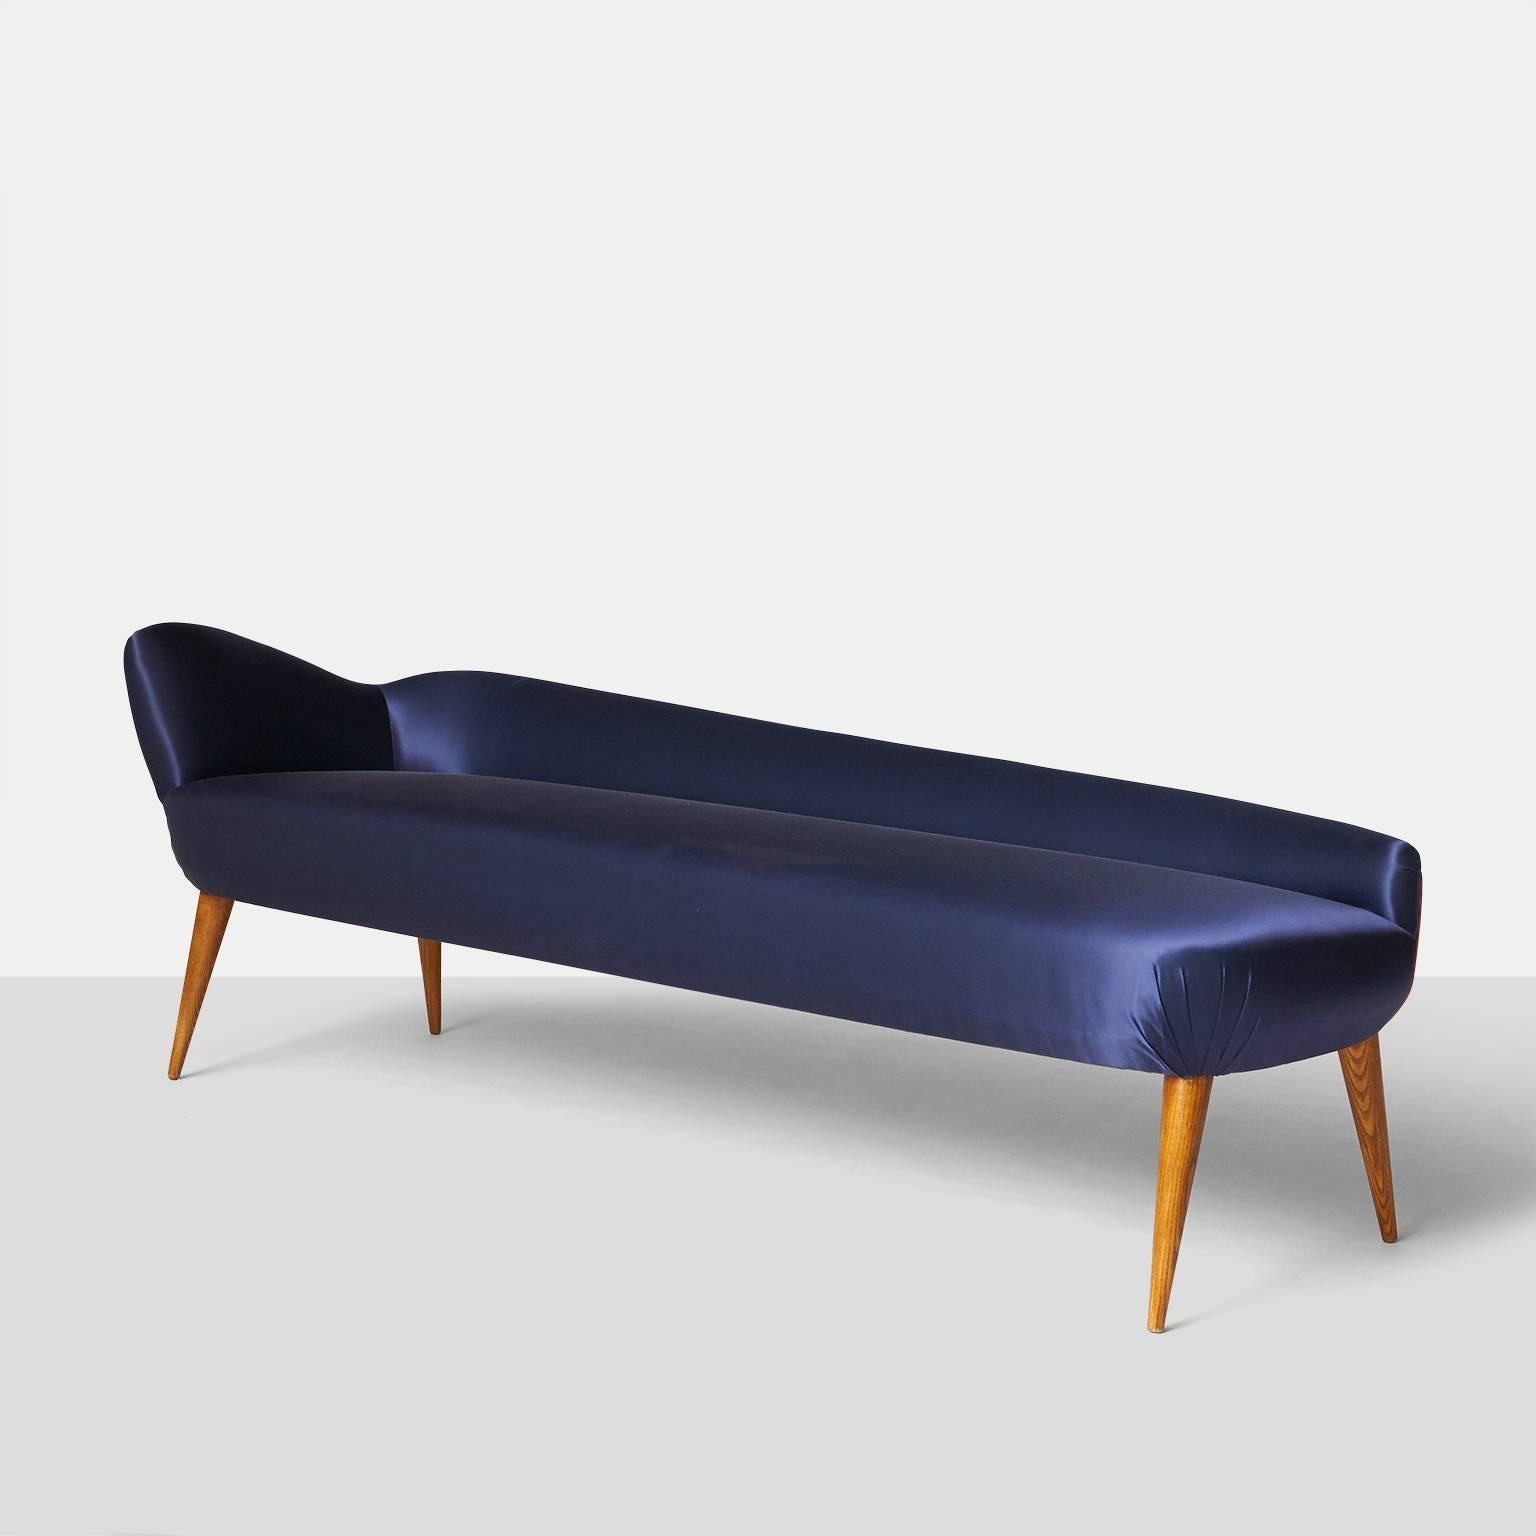 A classic Italian style daybed with oak legs and a sloping back made in the style of Ico Parisi. Upholstered in a deep blue satin fabric, Italy, circa 1950.